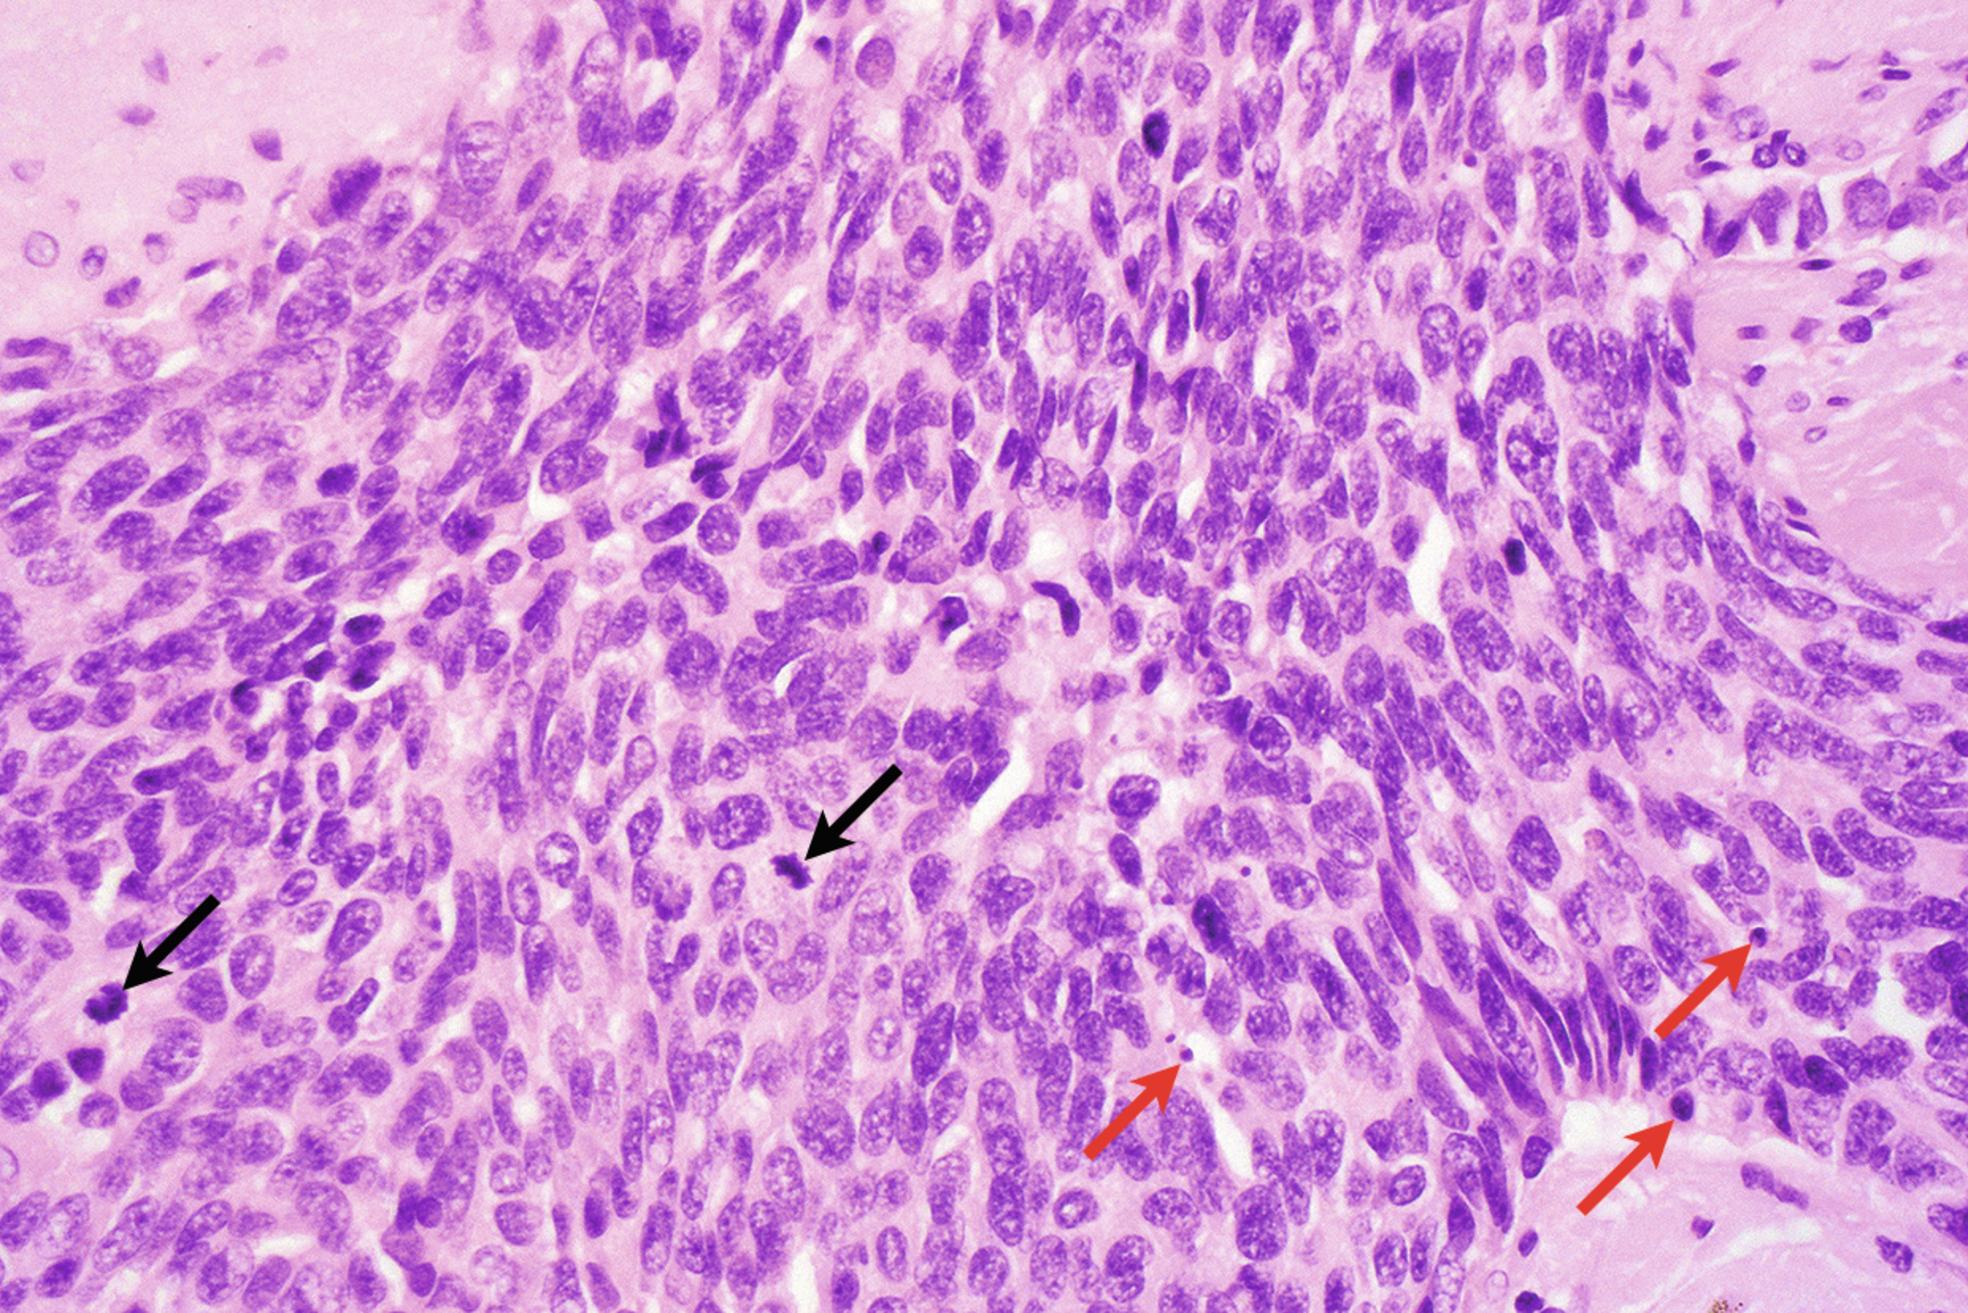 Fig. 14.3, Small cell neuroendocrine carcinoma showing tumor cells with high N/C ratio, salt and pepper chromatin, frequent mitoses ( black arrows ), and apoptotic bodies ( red arrows ).